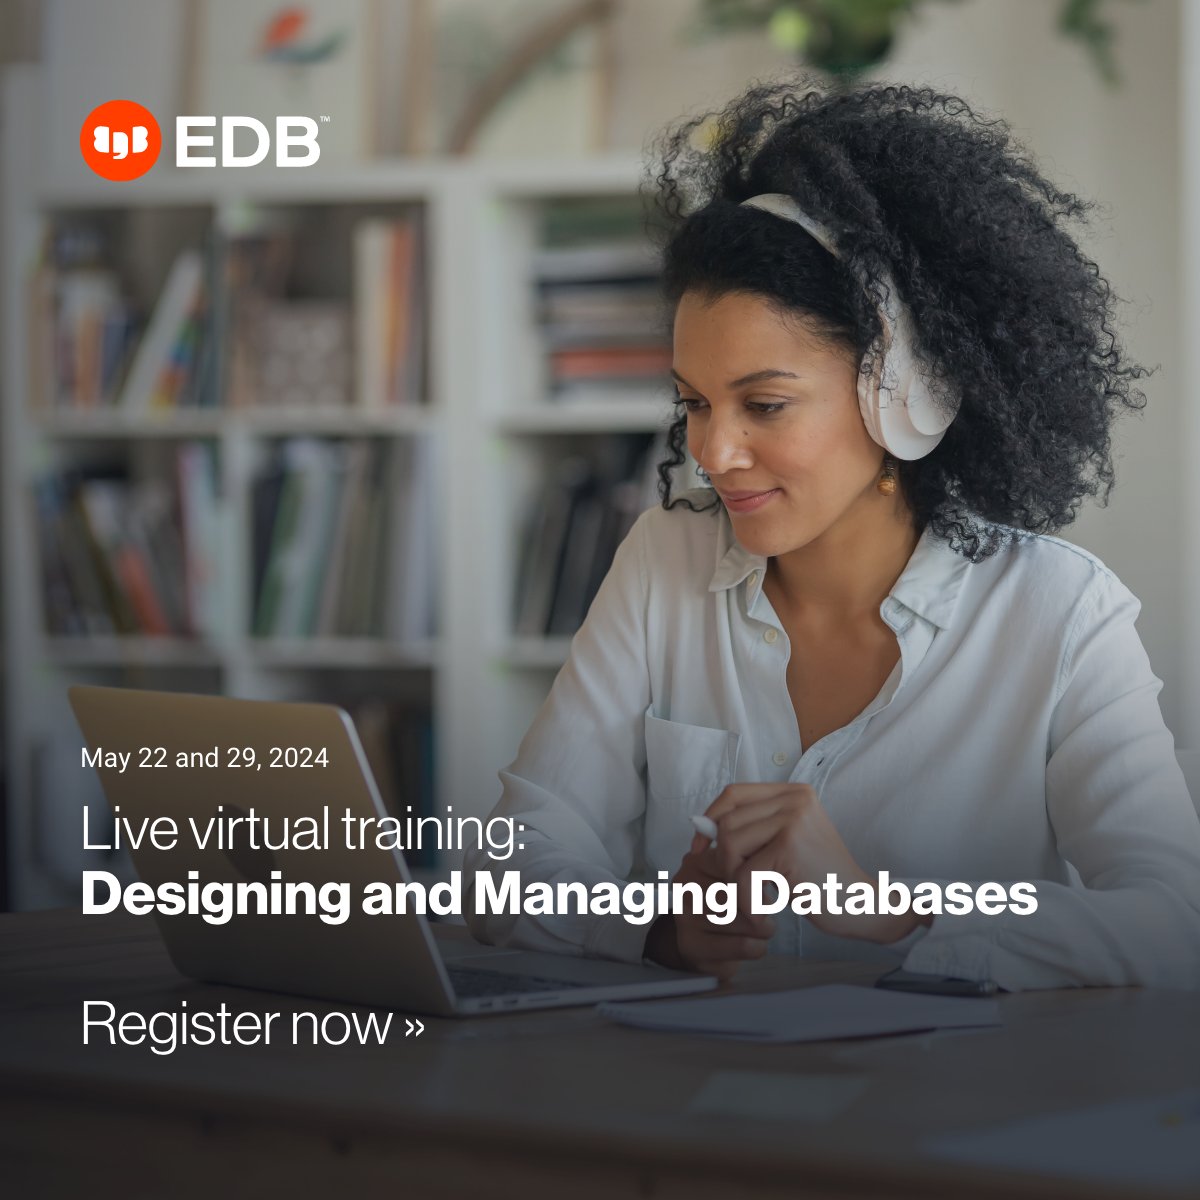 Learn from Postgres experts LIVE in our free virtual training: 'Designing and Managing Databases.' Only two sessions left in May. Don't miss out, register now: bit.ly/3TOO19v